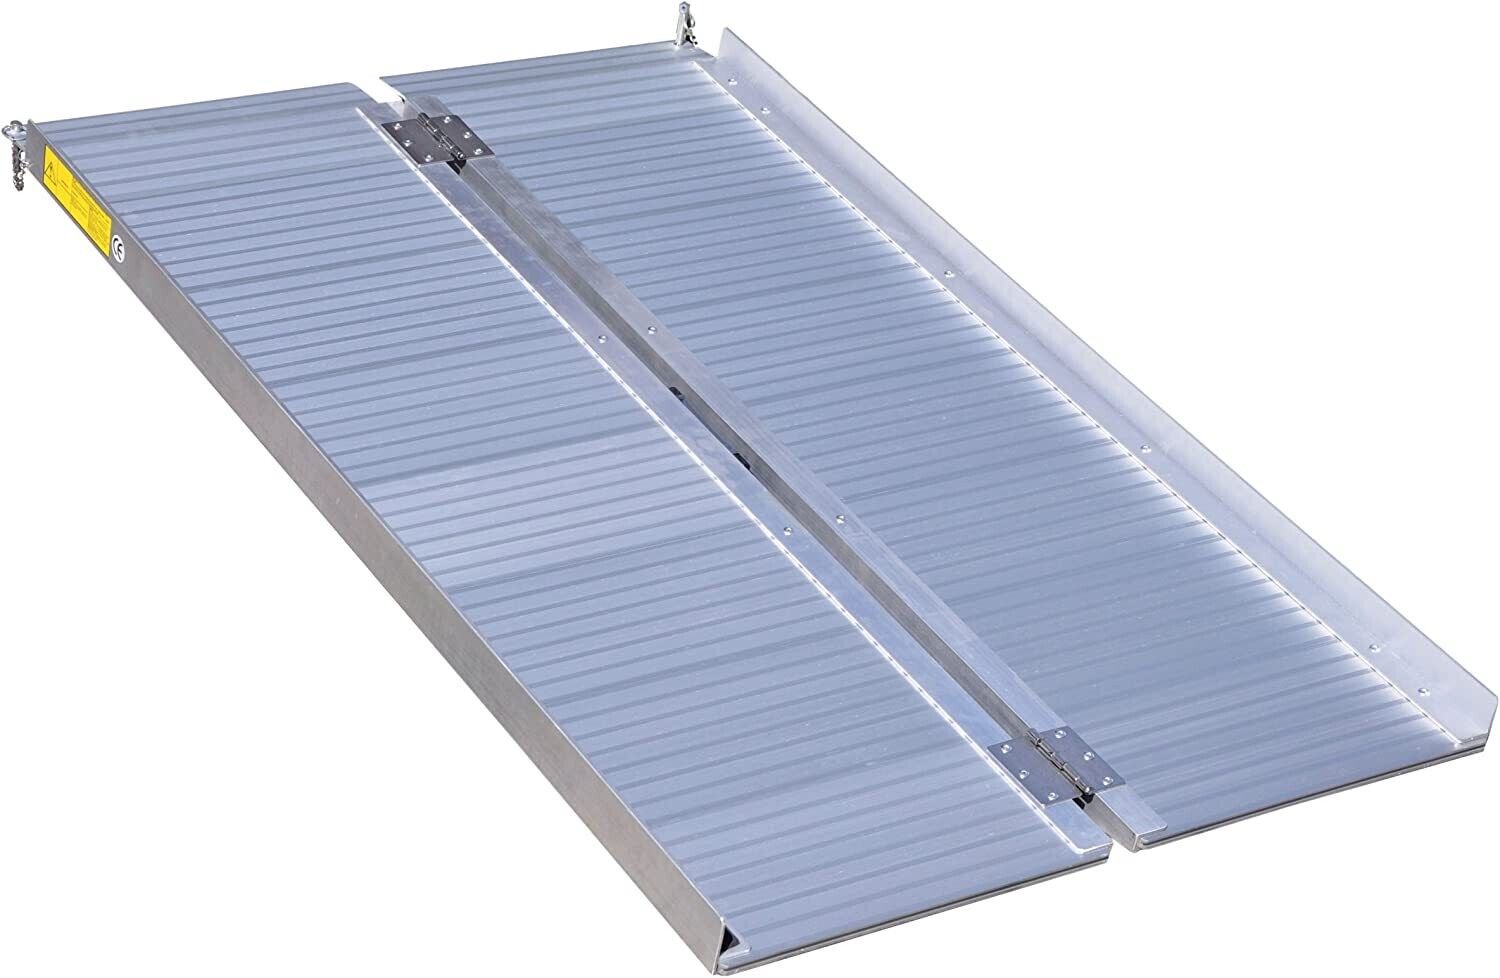 Aluminium Folding 3 ft Ramp that is lightweight, Portable with carrying Handle